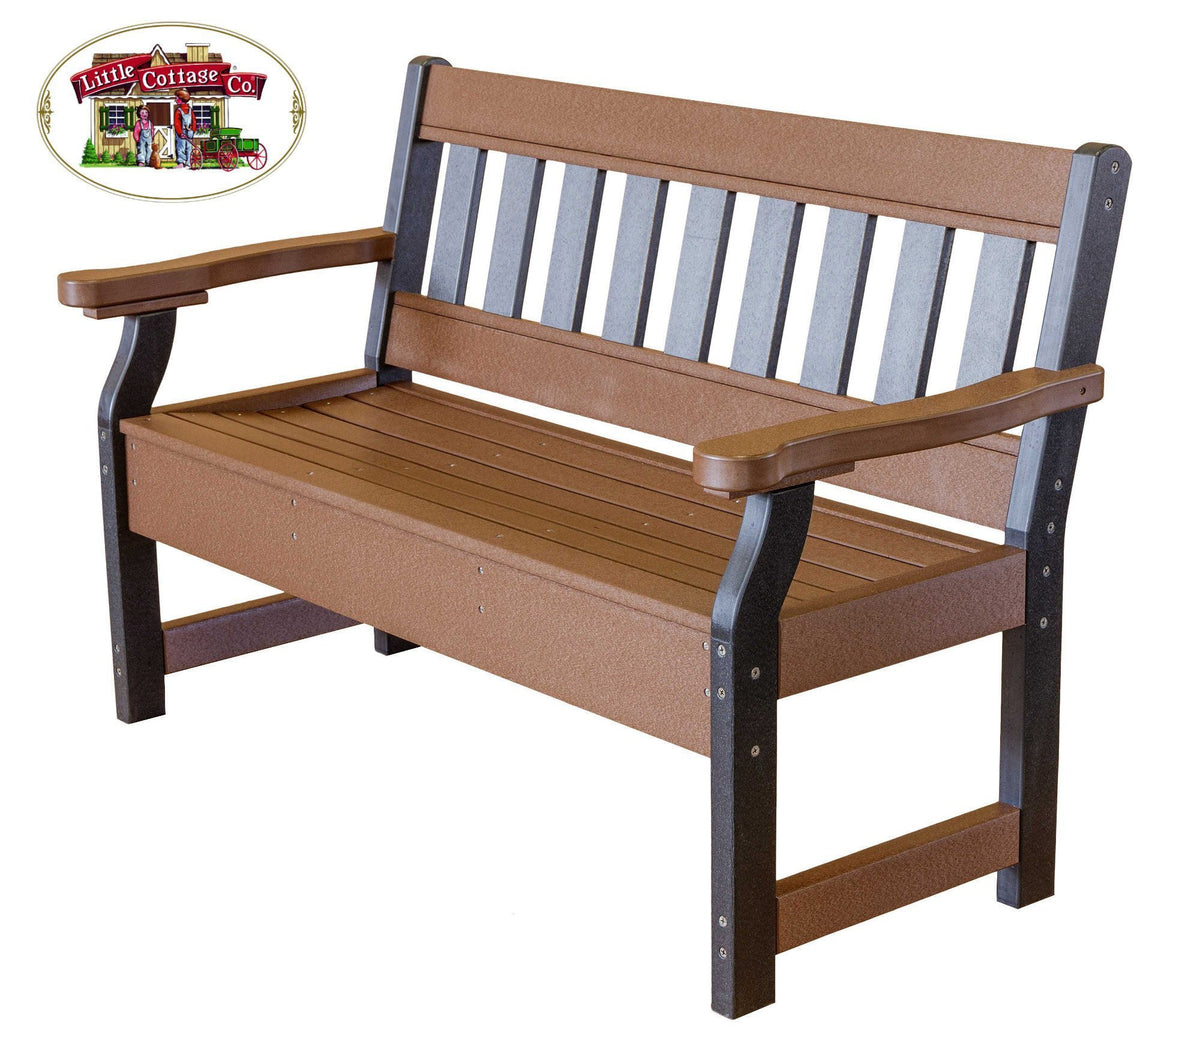 Little Cottage Co. Heritage 4ft. Recycled Plastic Garden Bench Garden Benches Black